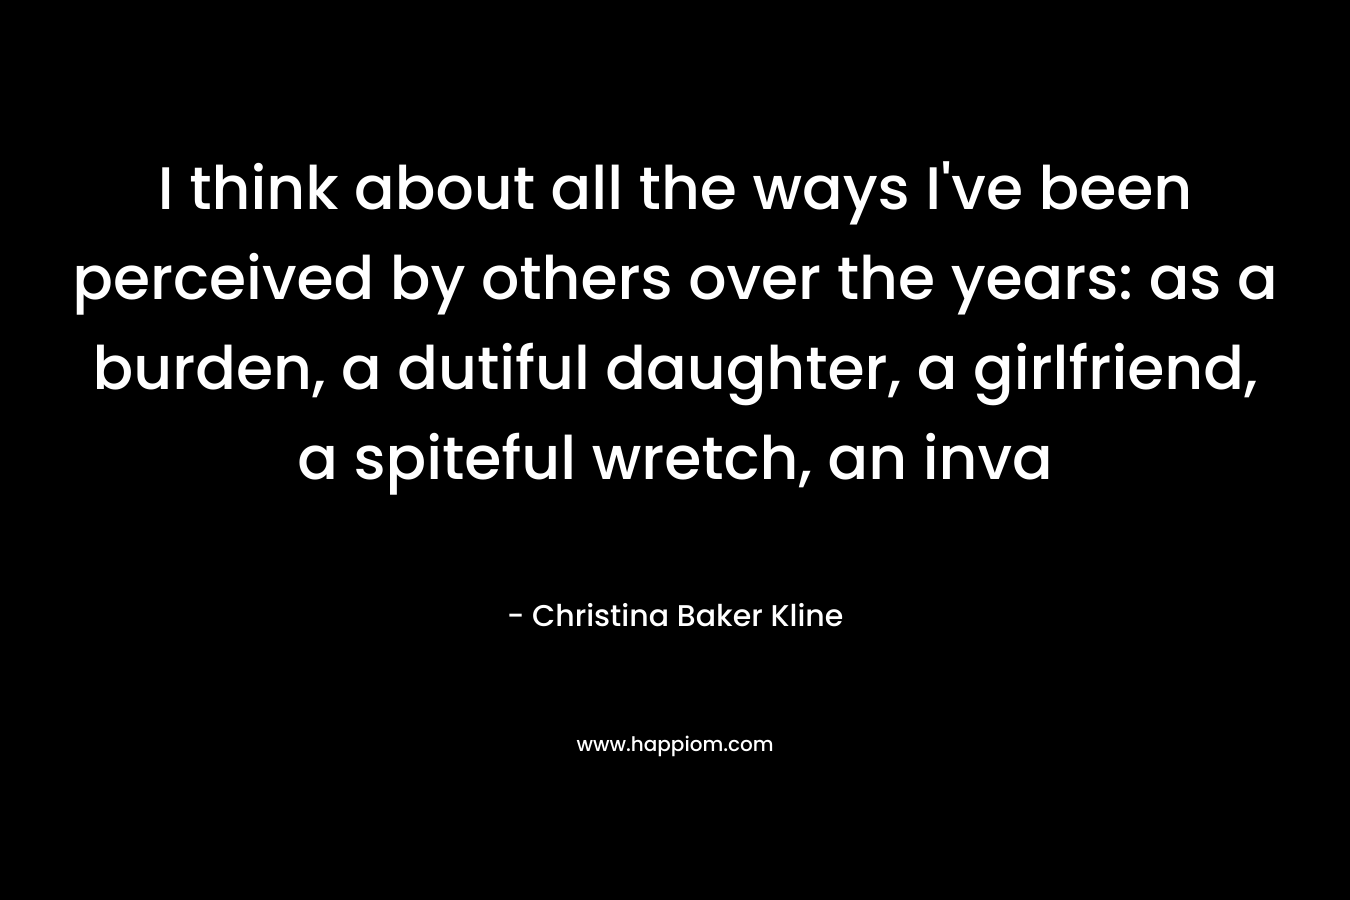 I think about all the ways I’ve been perceived by others over the years: as a burden, a dutiful daughter, a girlfriend, a spiteful wretch, an inva – Christina Baker Kline